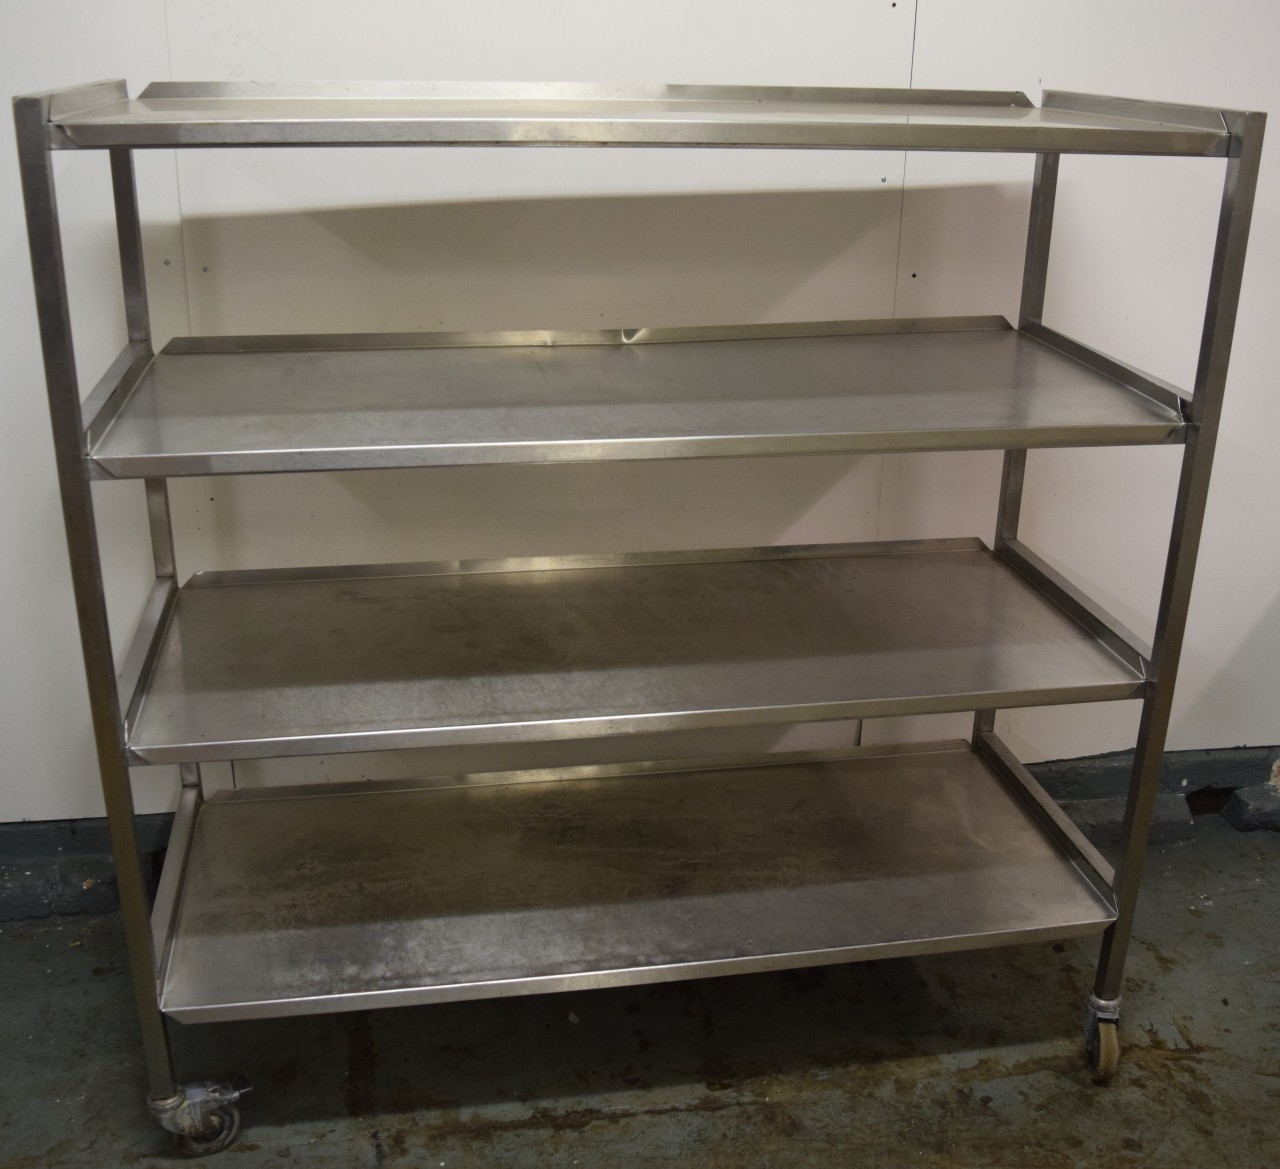 4 Tier Stainless Steel Strager Rack with Wheels. - CaterQuip 4 Tier Stainless Steel Shelf Rack